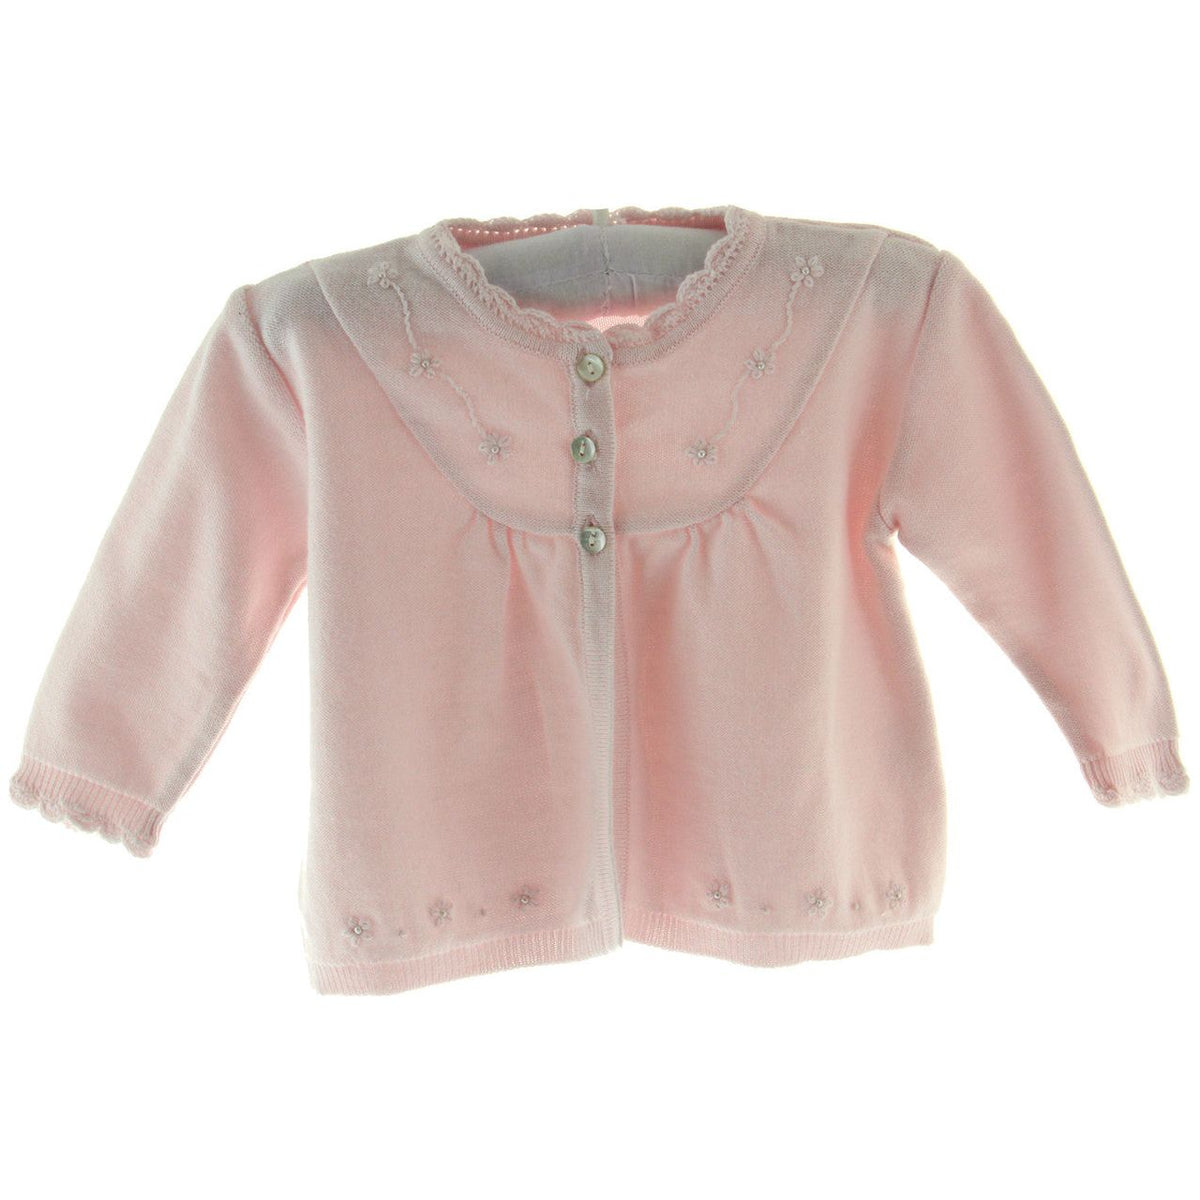 Infant Girls Pink Cardigan Sweater with Pearls